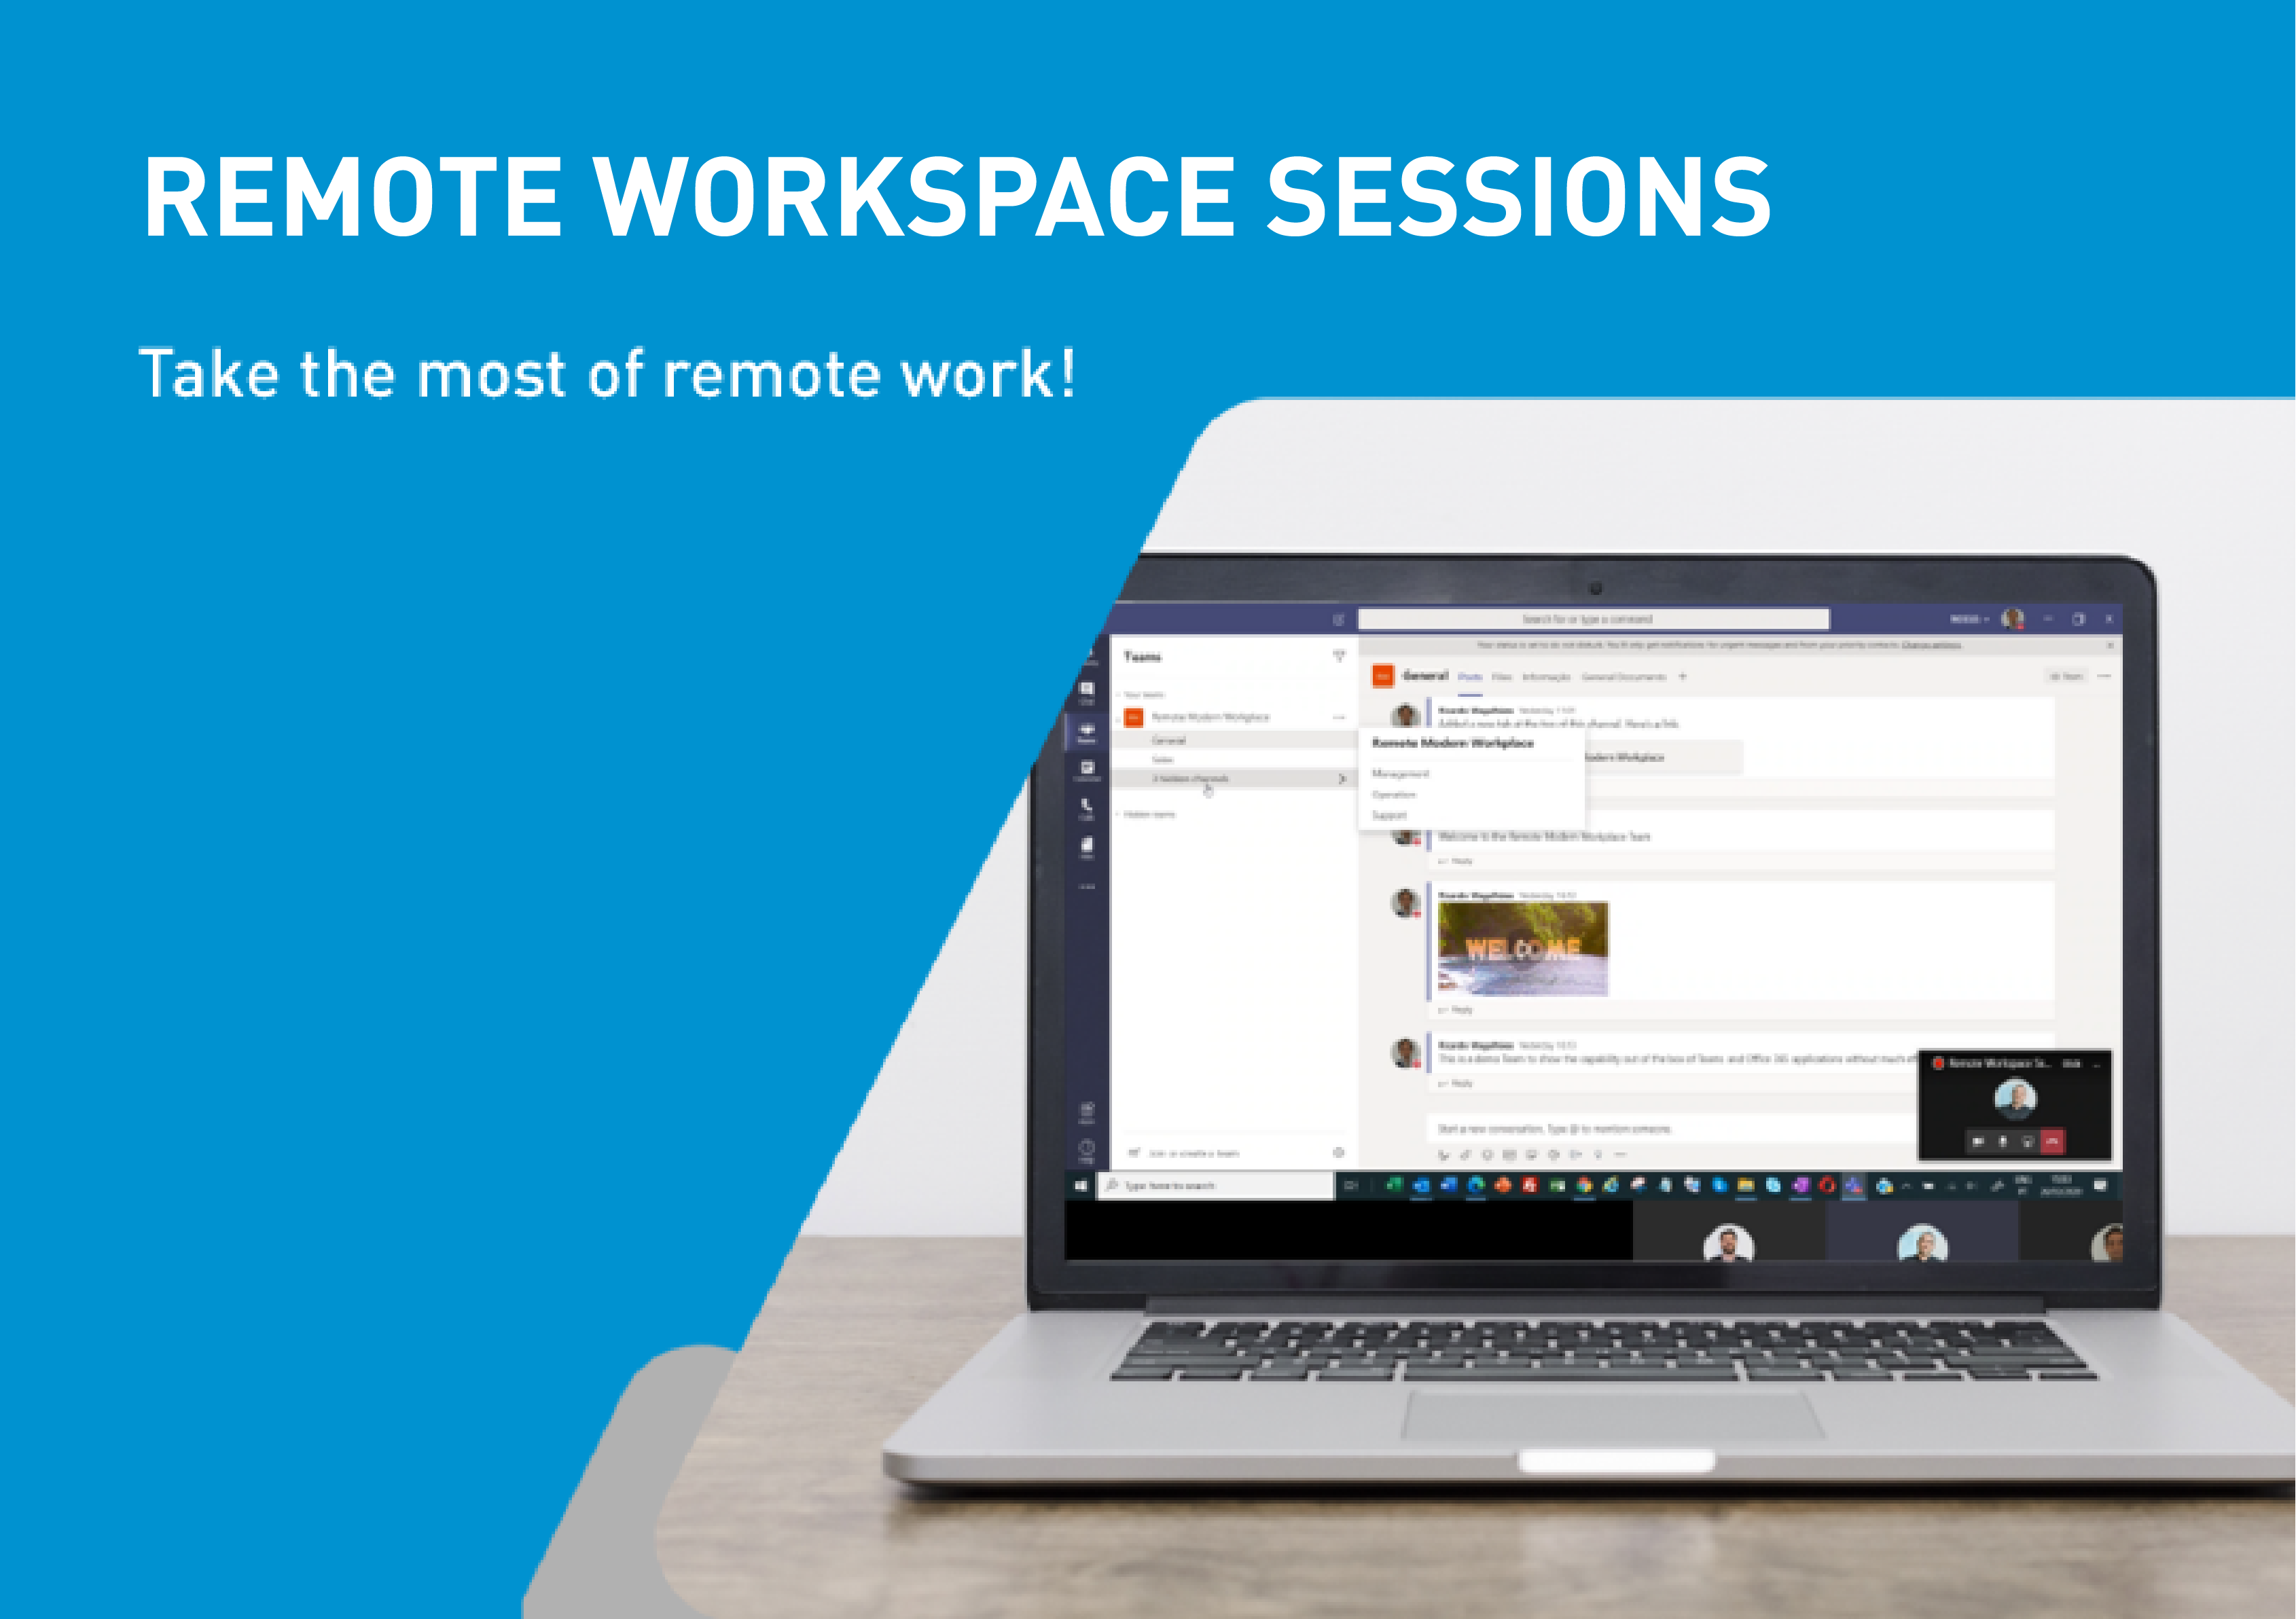 Remote Workspace Sessions